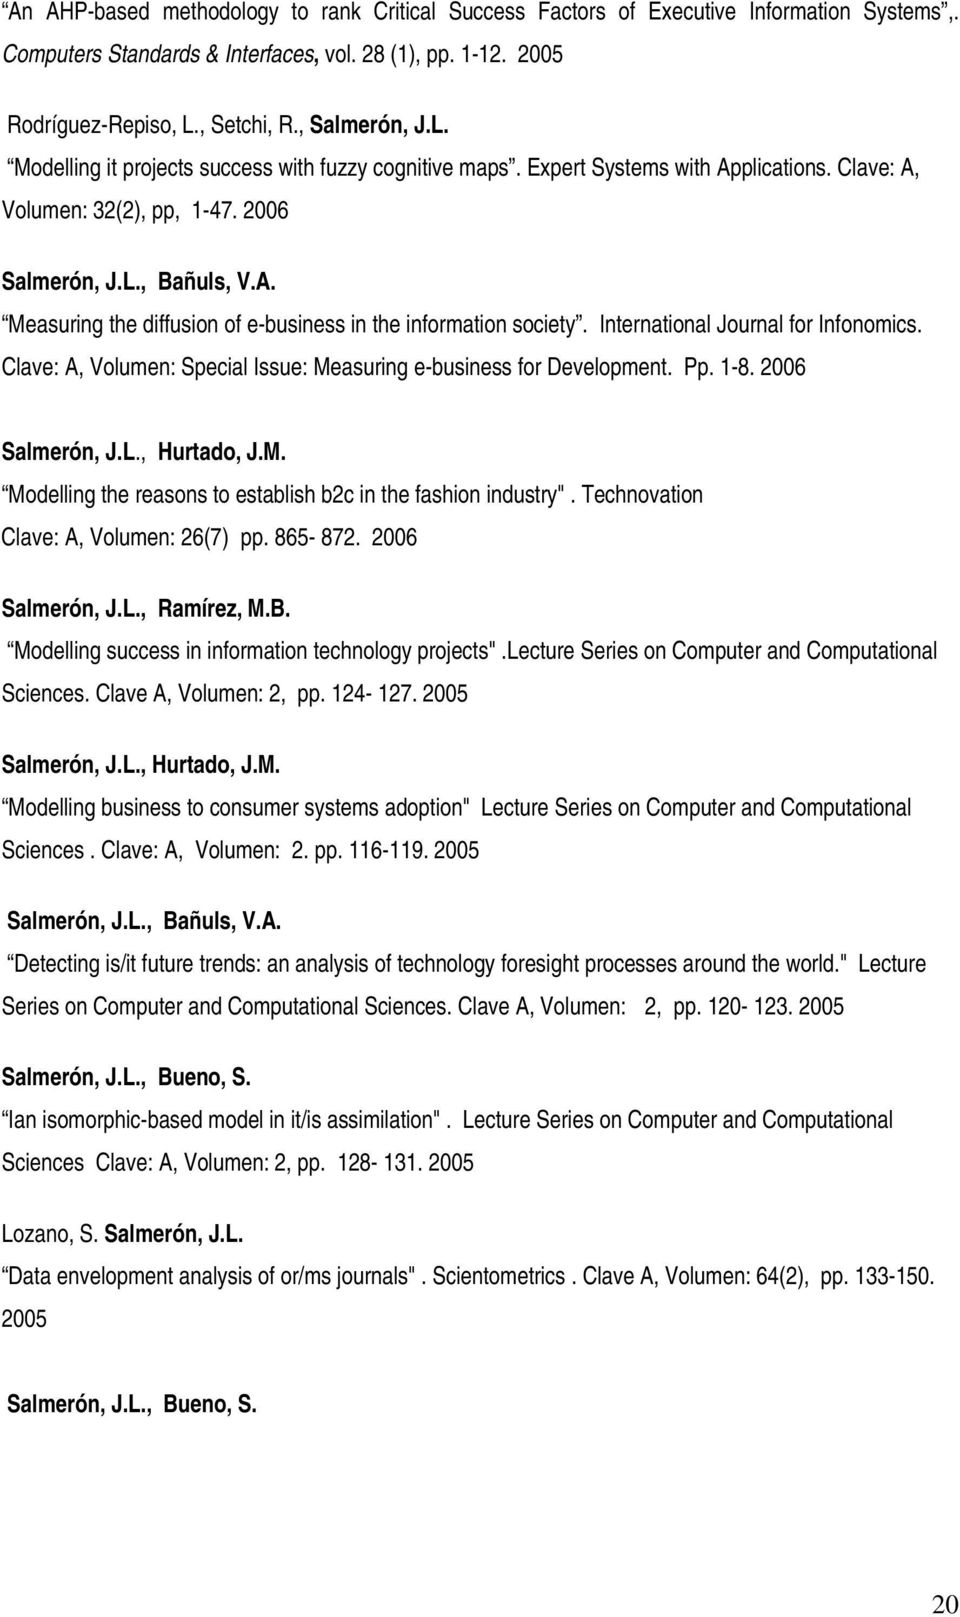 International Journal for Infonomics. Clave: A, Volumen: Special Issue: Measuring e-business for Development. Pp. 1-8. 2006 Salmerón, J.L., Hurtado, J.M. Modelling the reasons to establish b2c in the fashion industry".